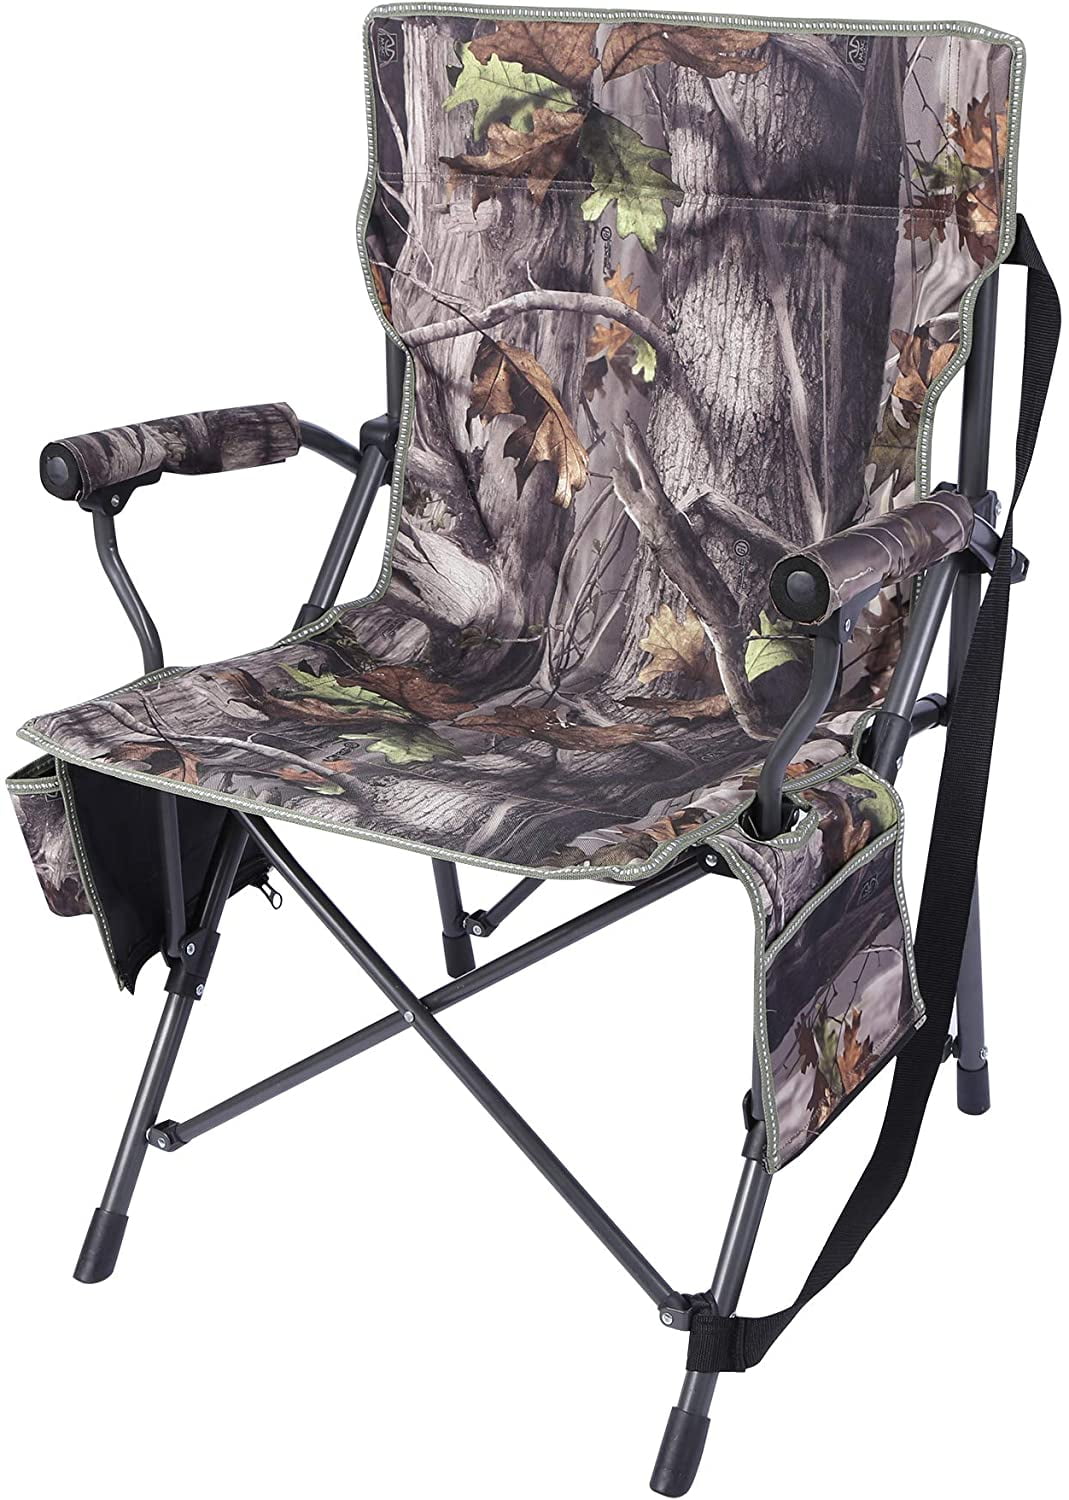 Portable Hunting Chair Armrest Blind Camo Foldable Camping Bonfire Fishing Seat 